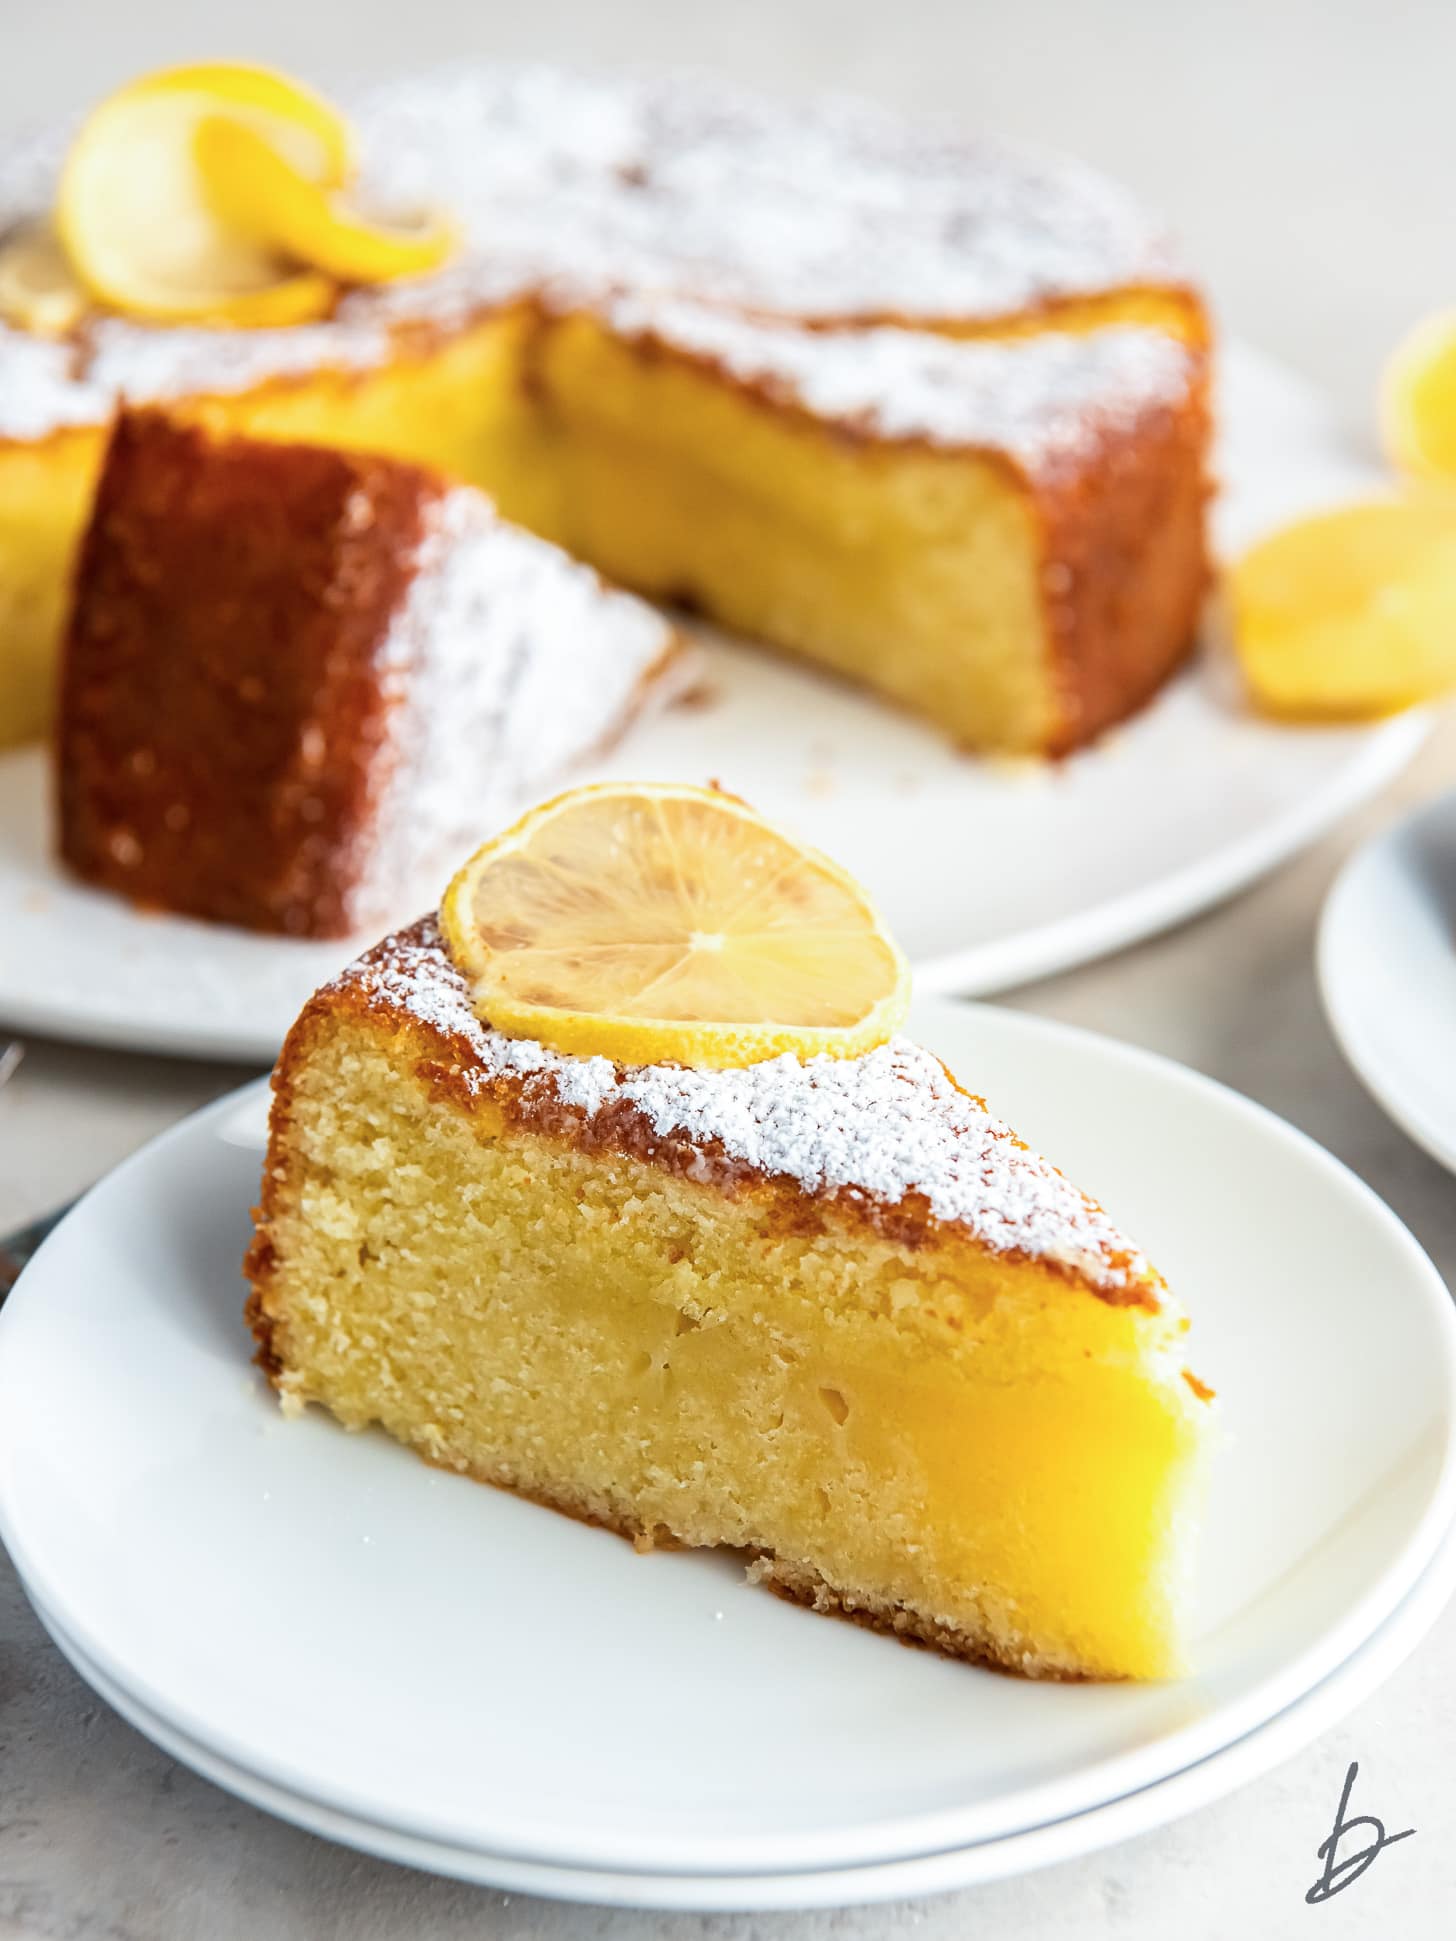 slice of lemon olive oil cake dusted with confectioners' sugar and garnished with a lemon slice.